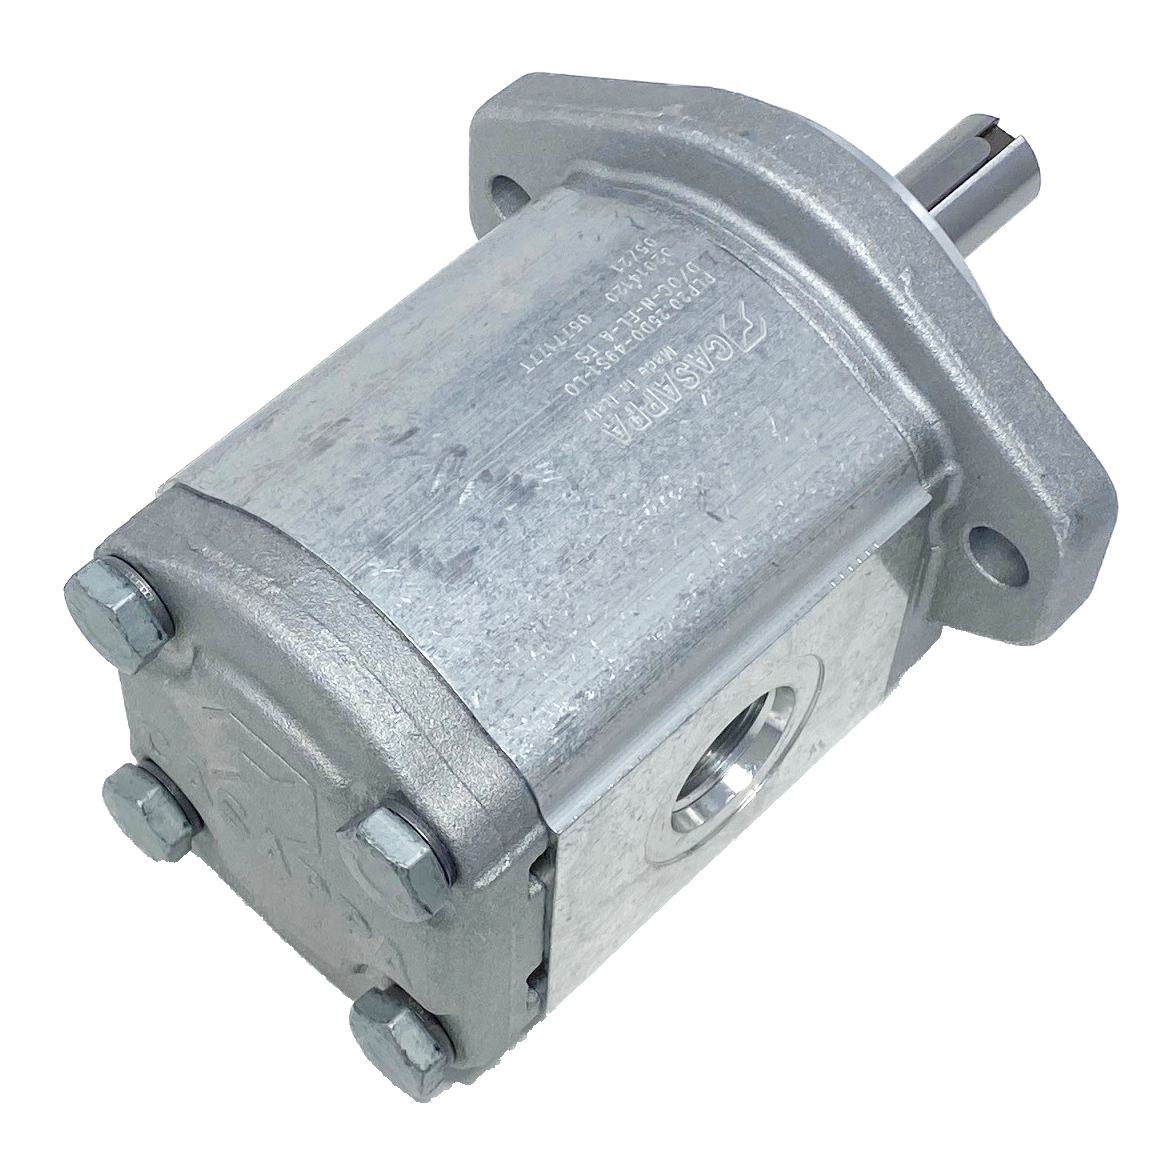 PHP20.25S0-49S9-LOG/OC-N-EL : Casappa Polaris Gear Pump, 26.42cc, 3335psi Rated, 3000RPM, CCW, 3/4" Bore x 3/16" Key Shaft, SAE A 2-Bolt Flange, 1.25" #20 SAE Inlet, 0.625 (5/8") #10 SAE Outlet, Cast Iron Body, Aluminum Flange